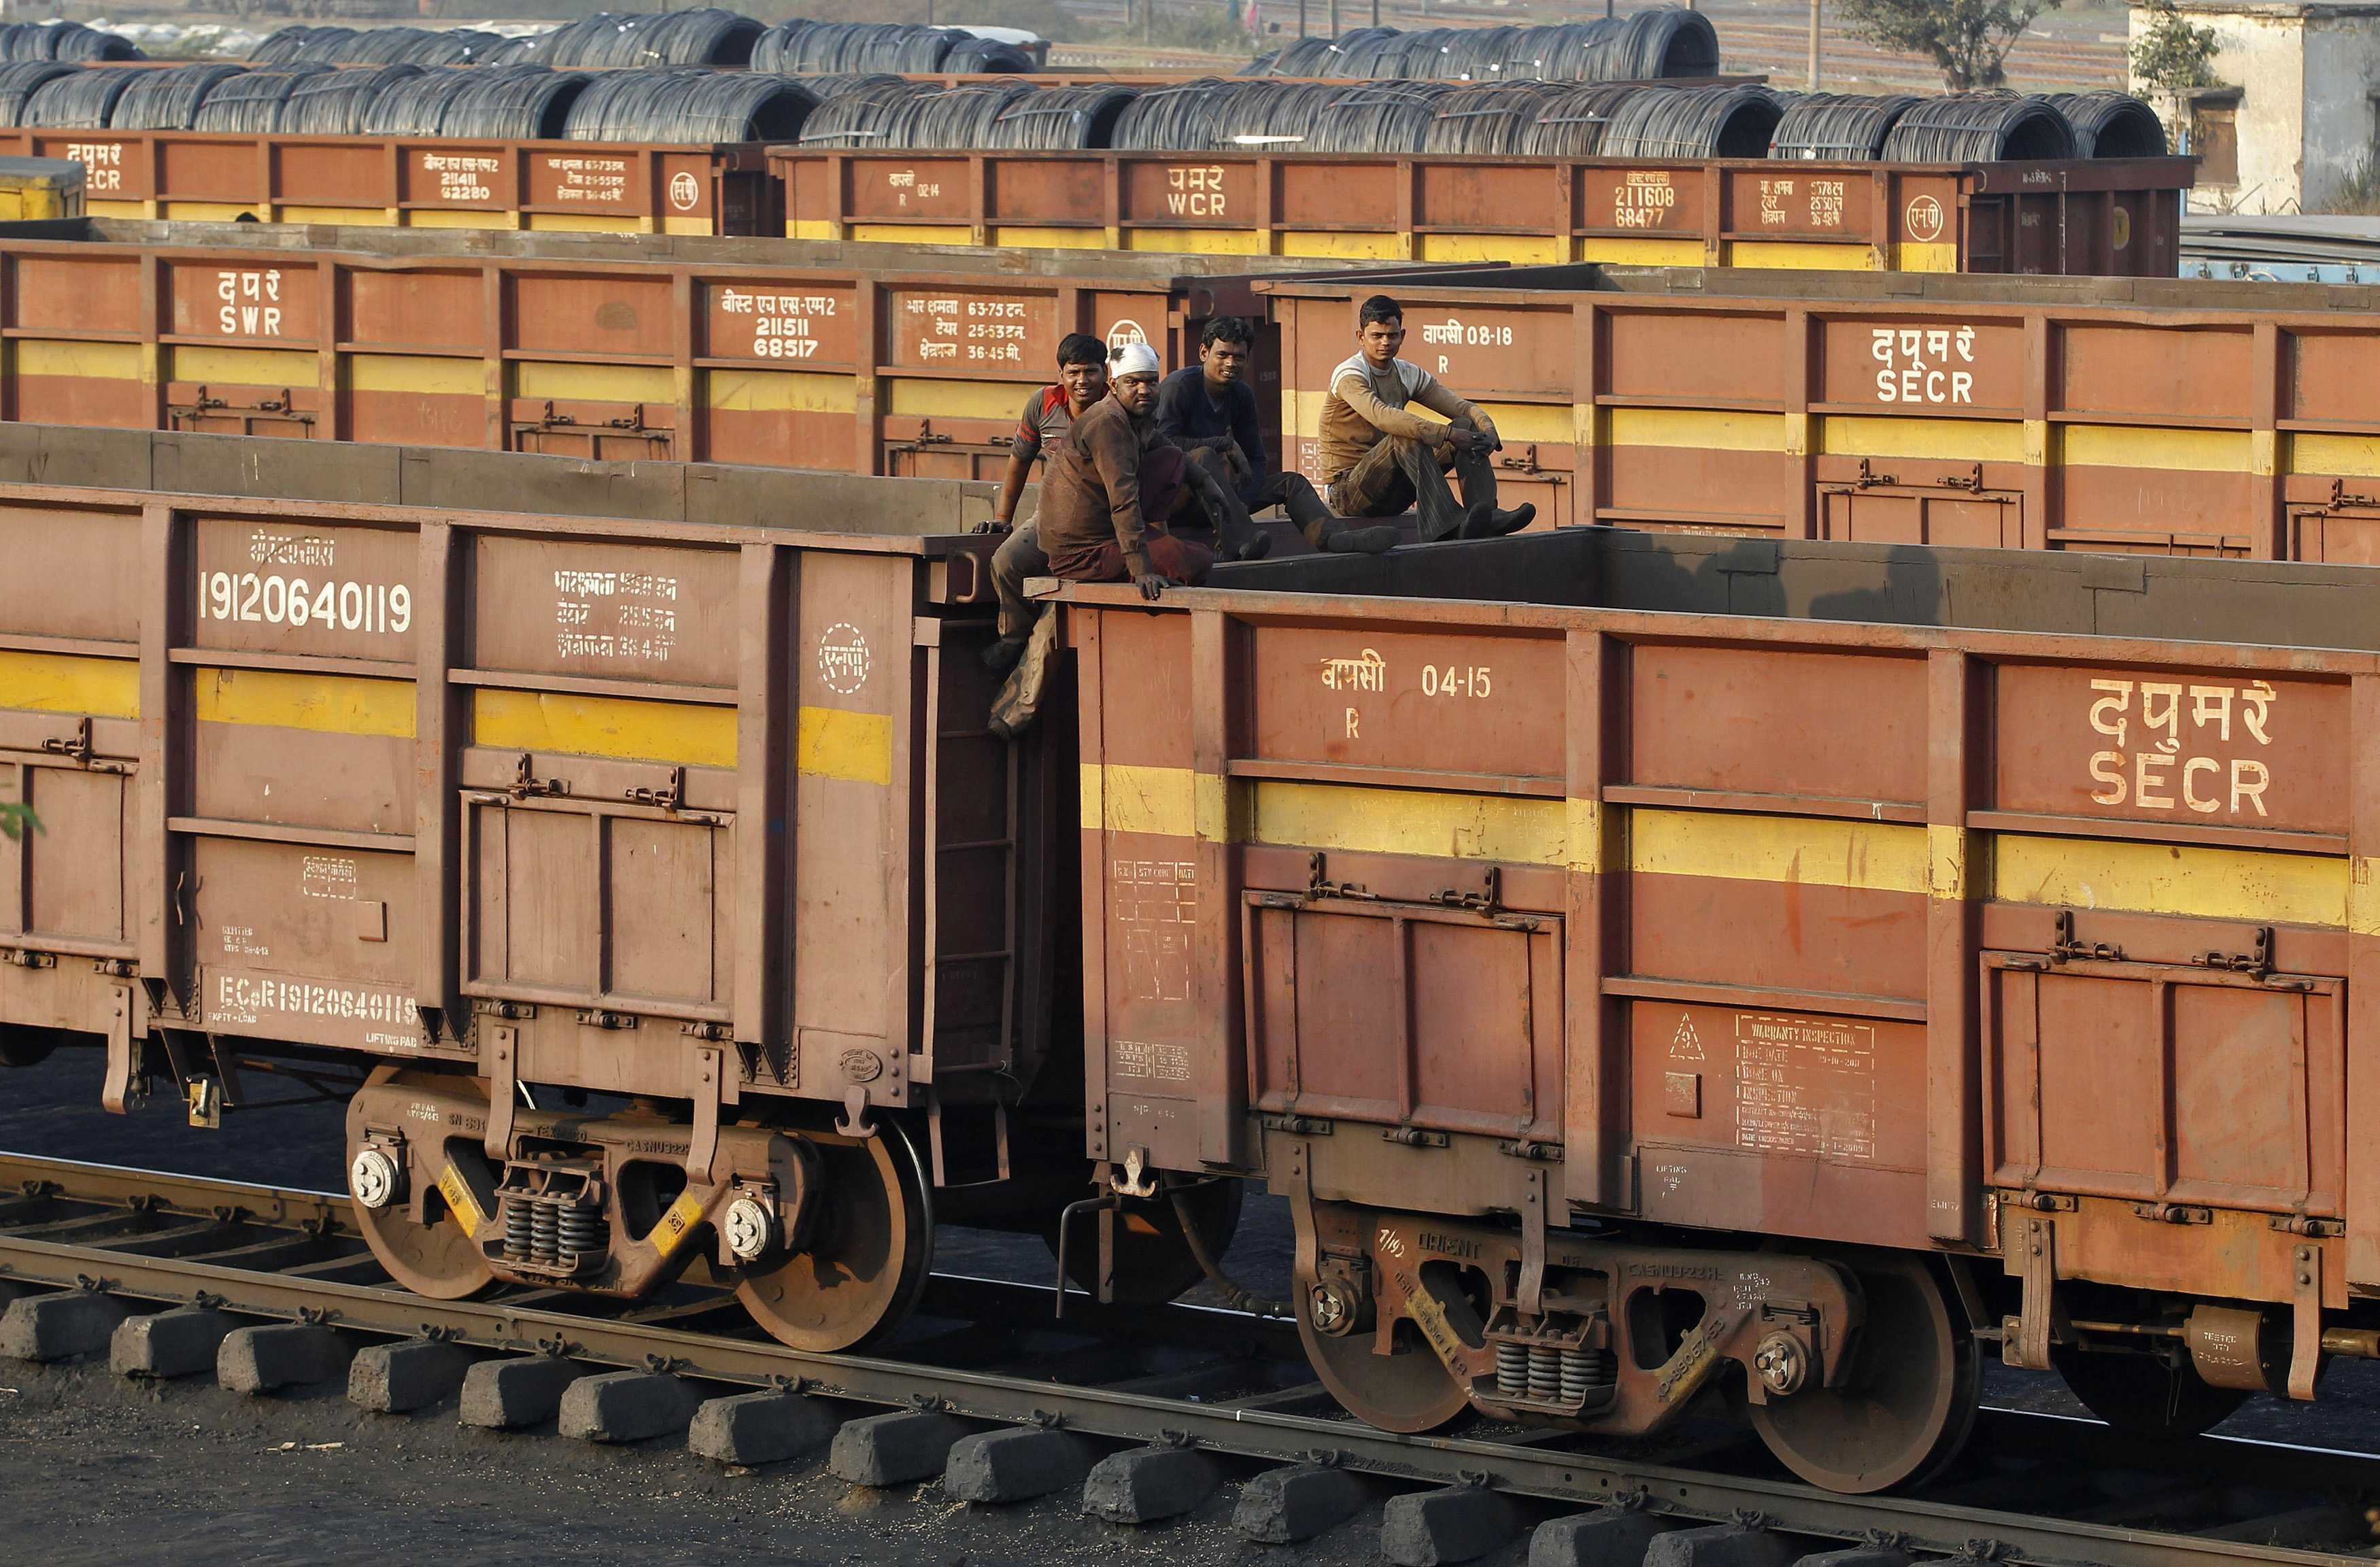 Workers sit on top of a goods train at a railway yard in Ahmedabad